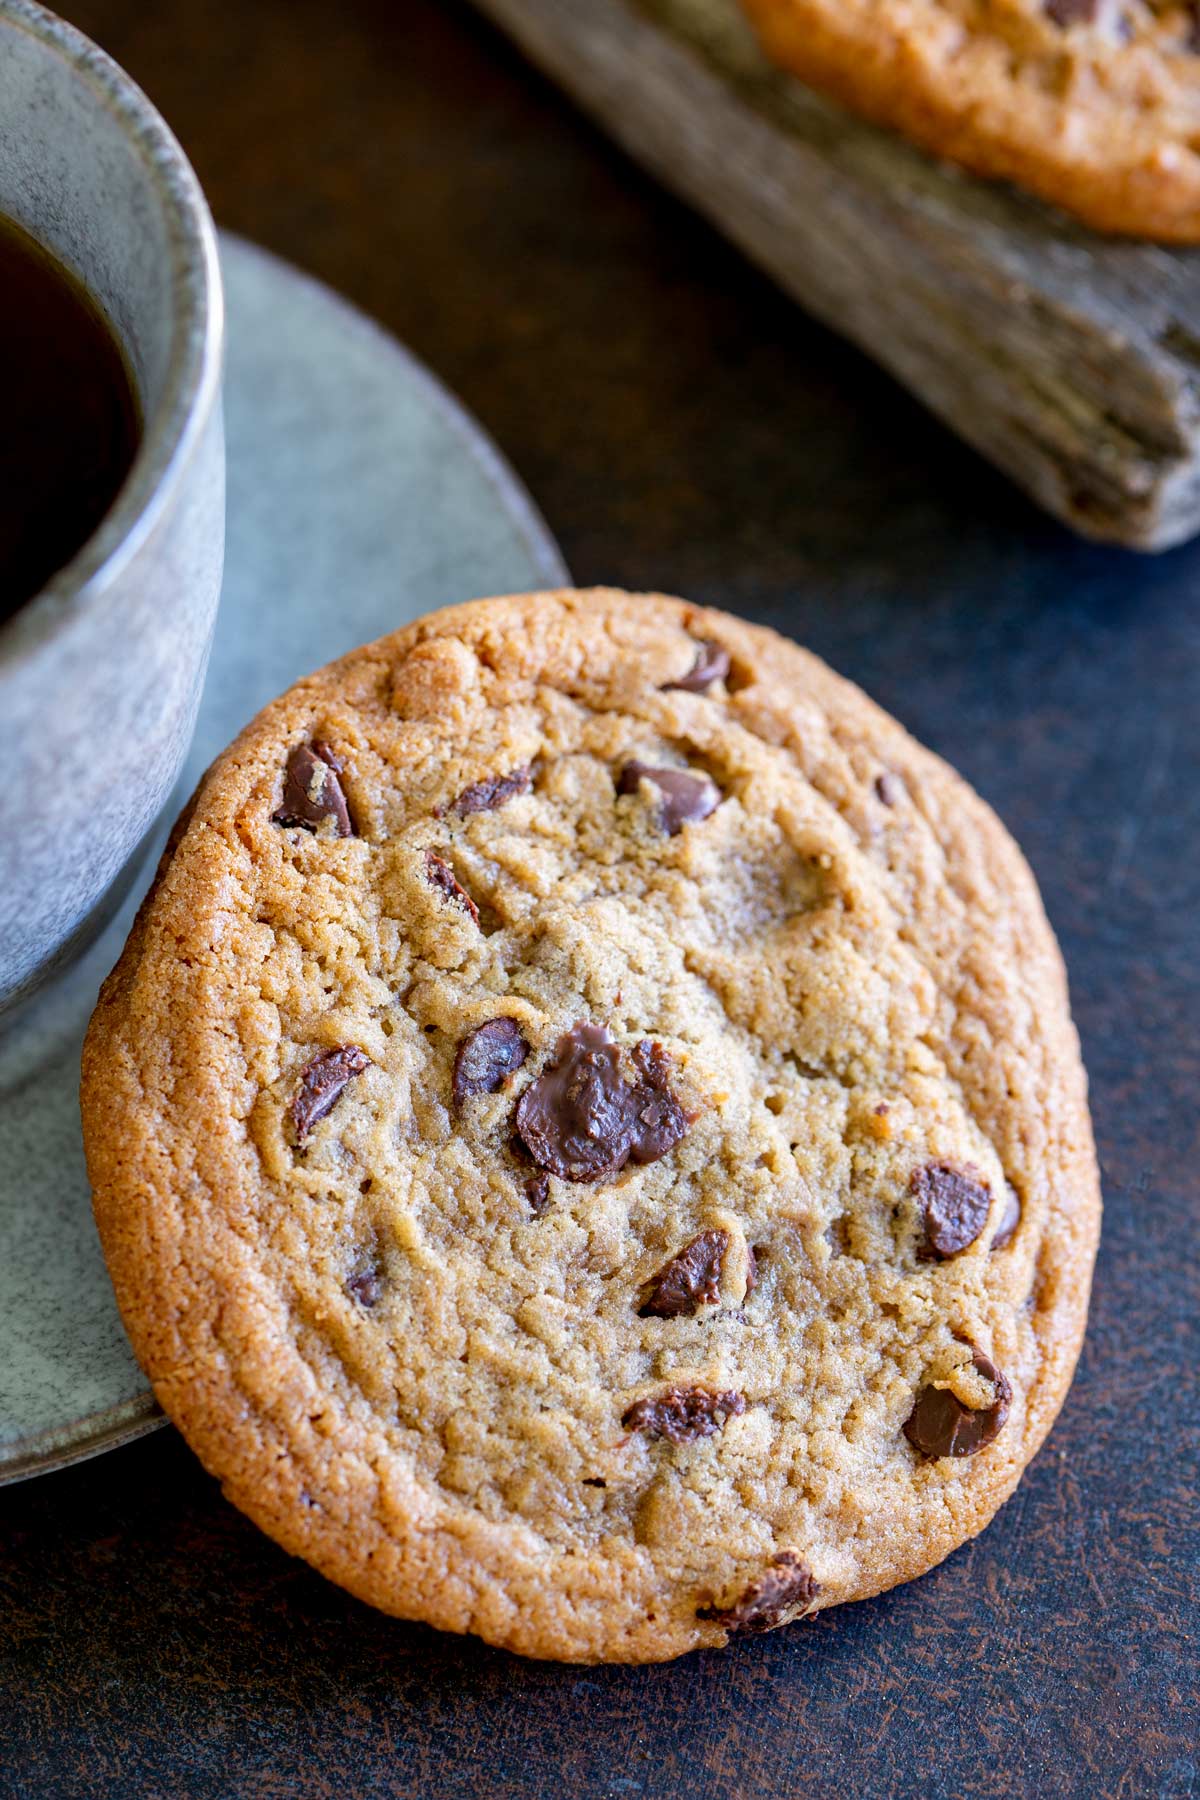 a subway style choc chip cookie leaning against a cup